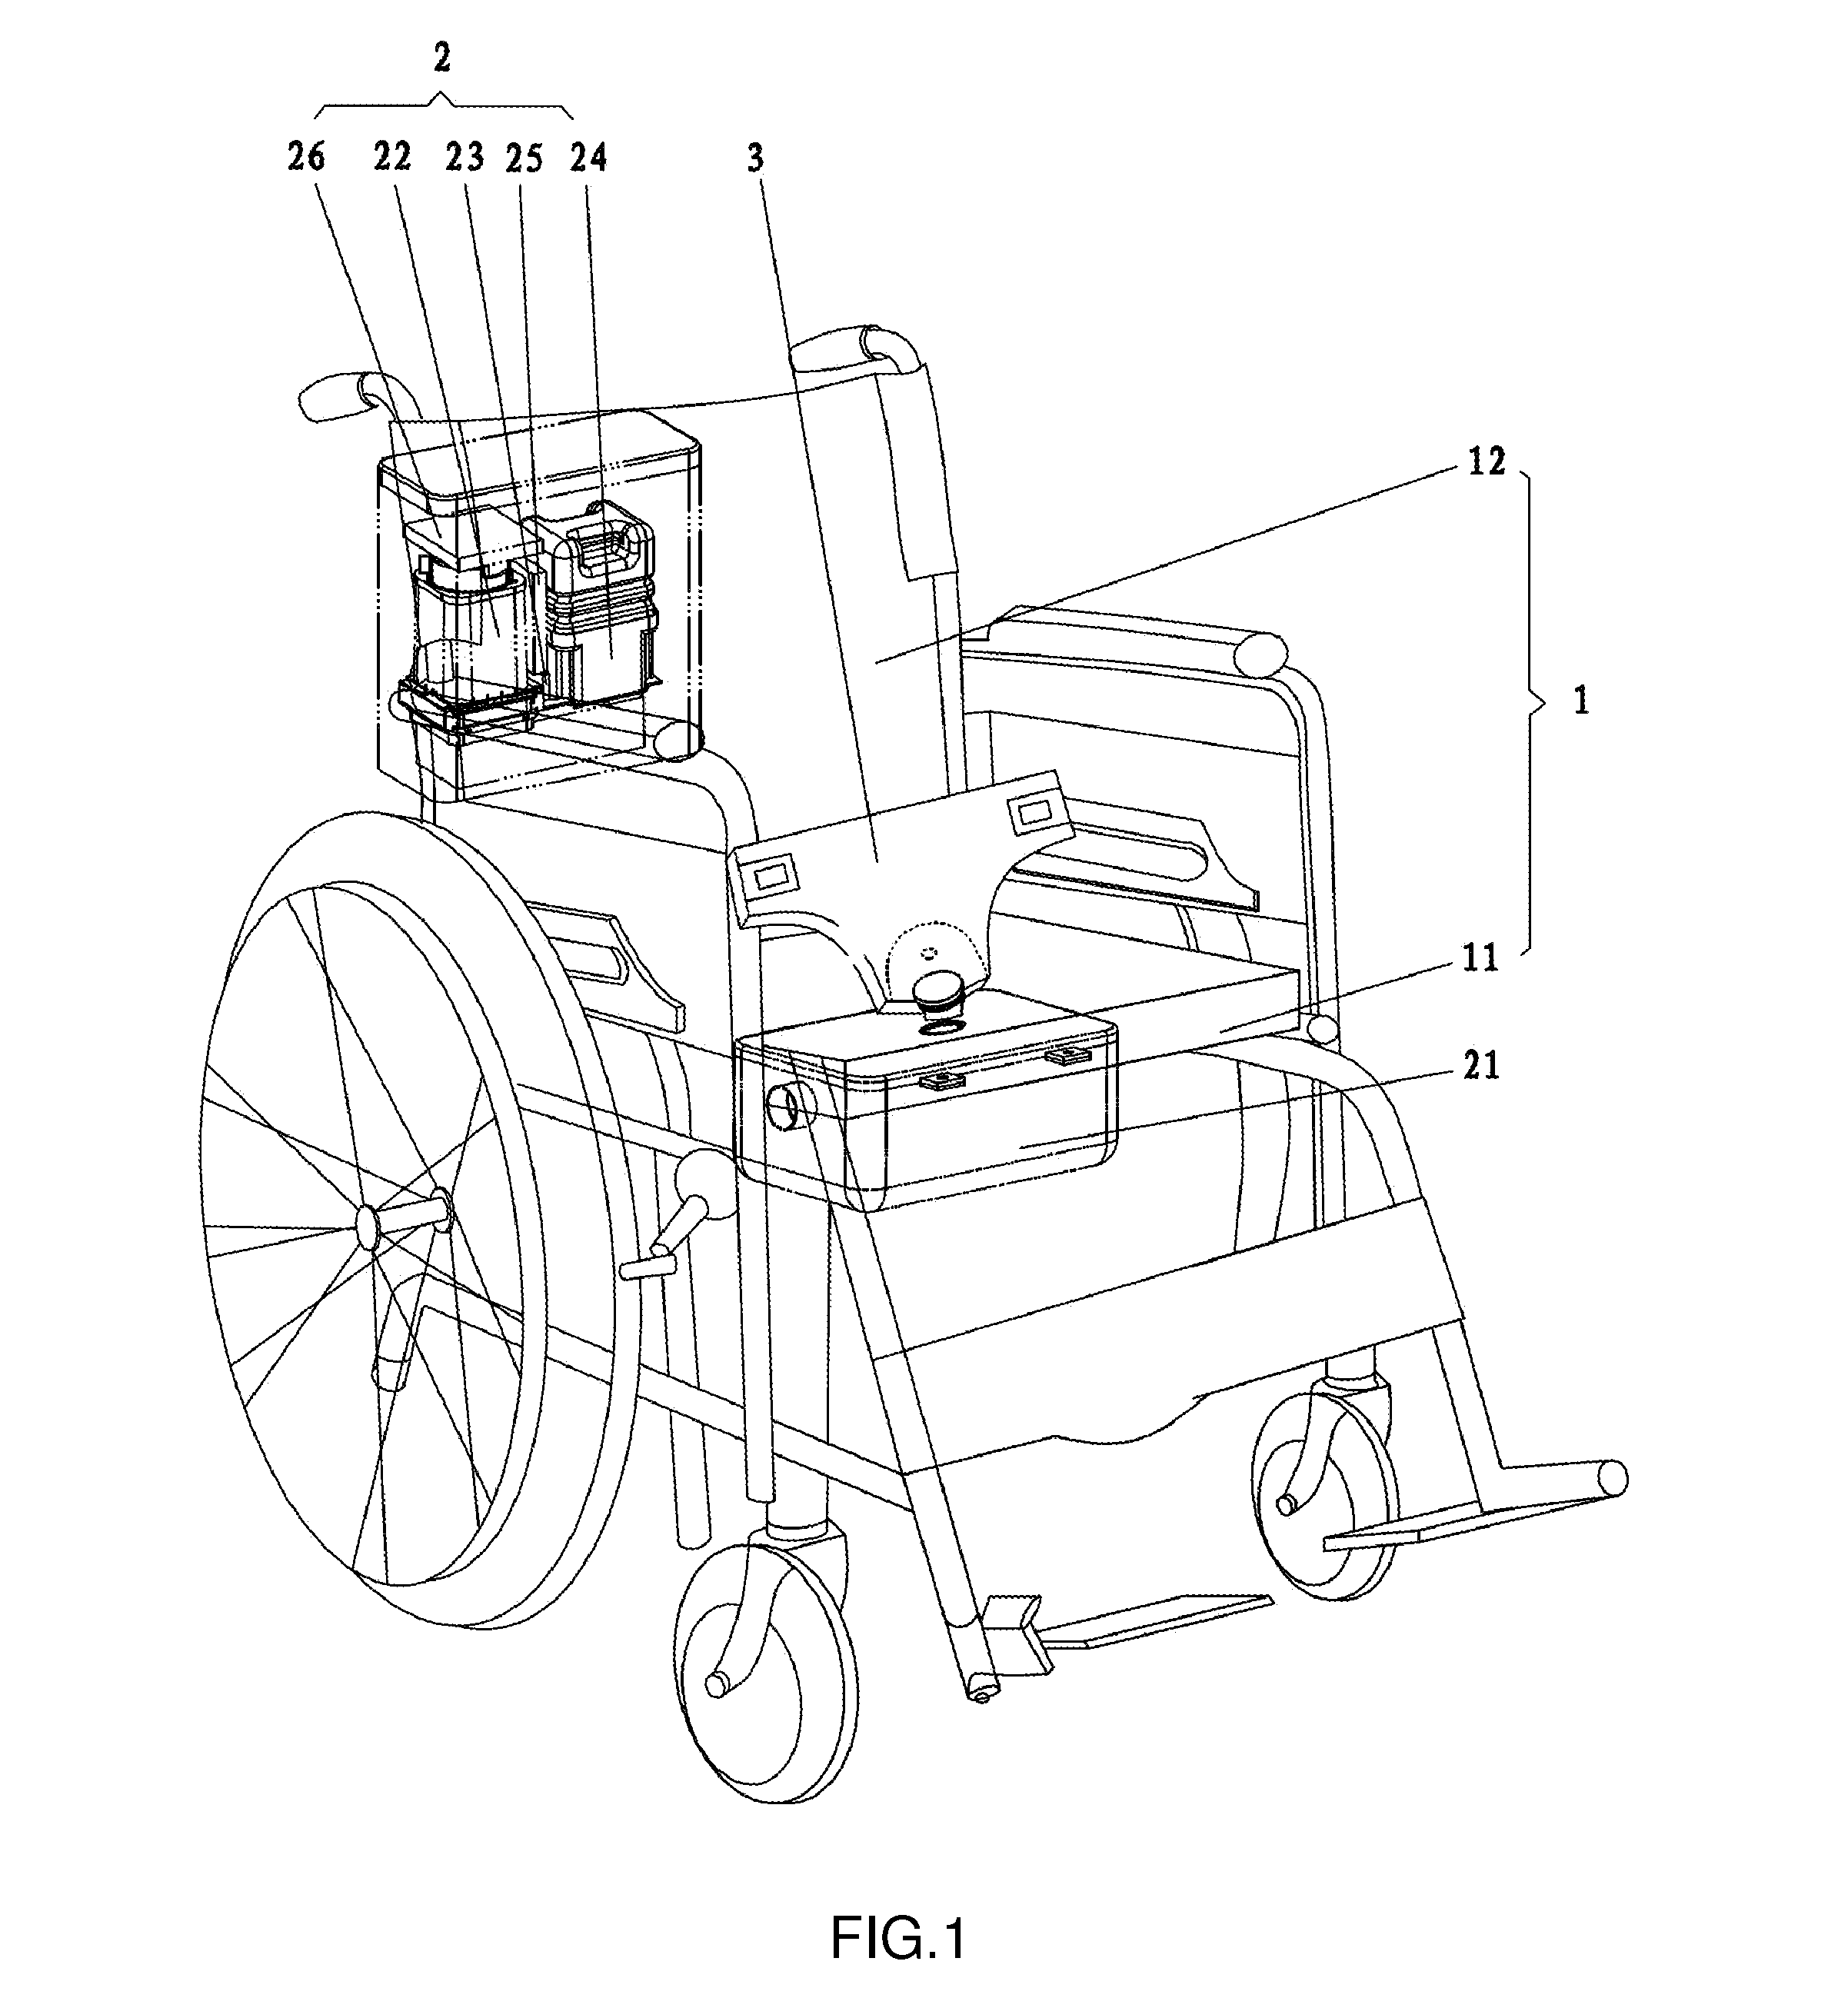 Automatic wheelchair-type feces cleaner without need of undressing and dressing